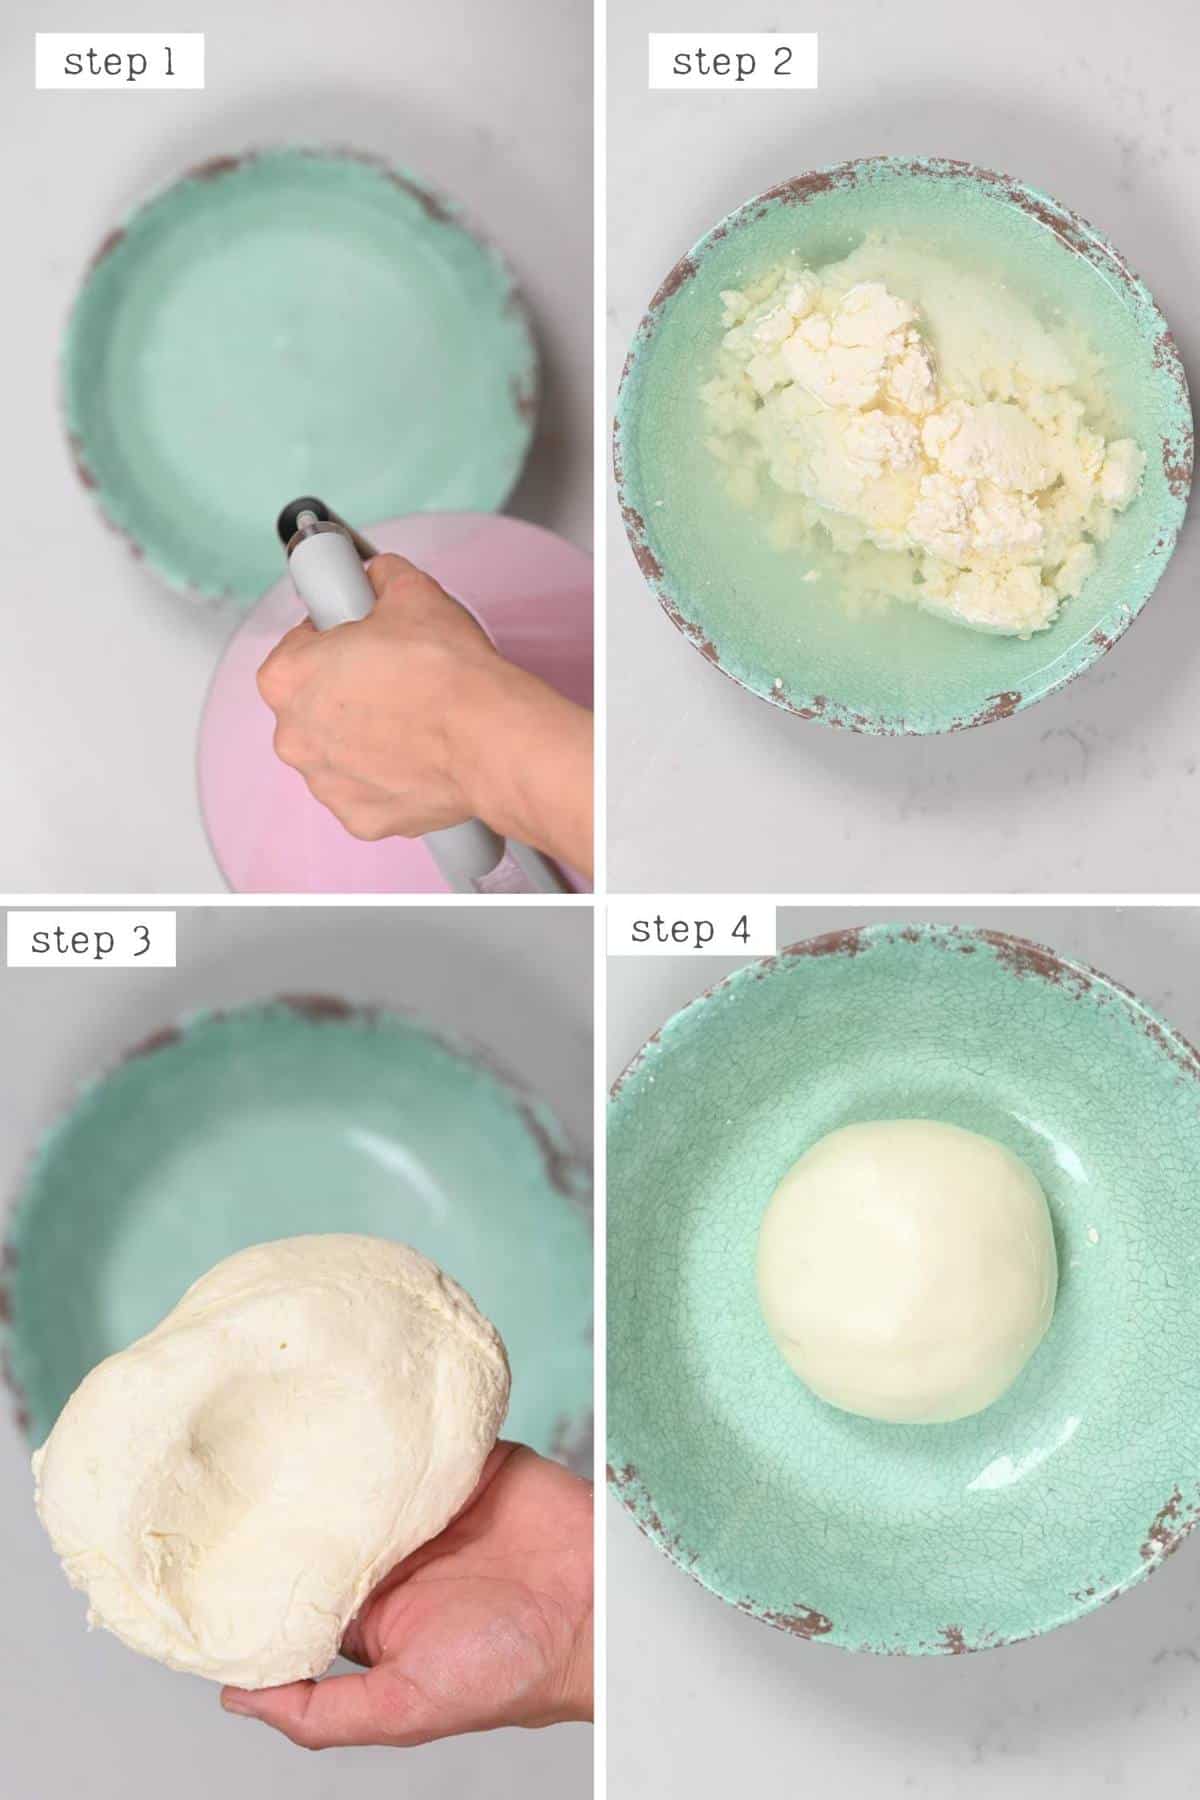 third stage for making mozzarella stretching and shaping